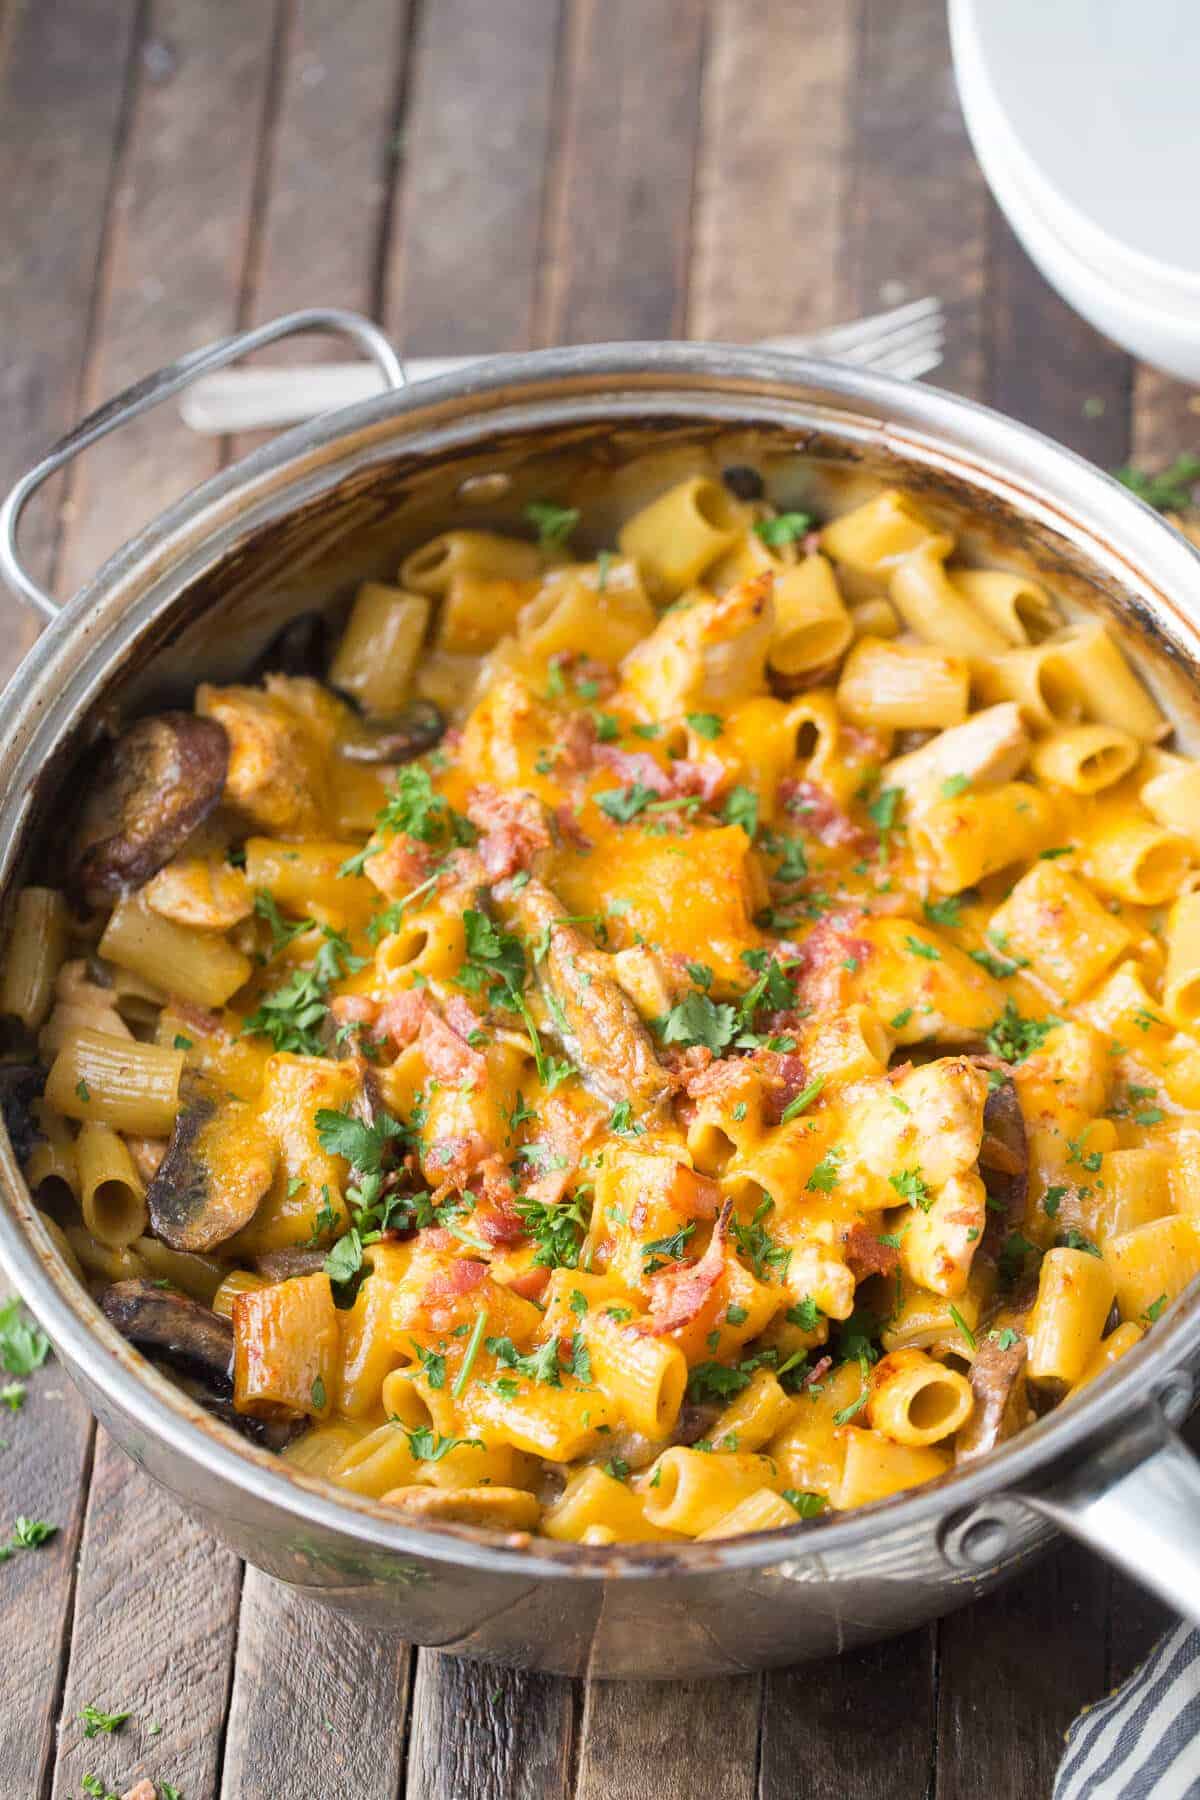 This Alice Springs Chicken dish is a one-pot wonder! This pasta is so creamy and good, you will surely have seconds!